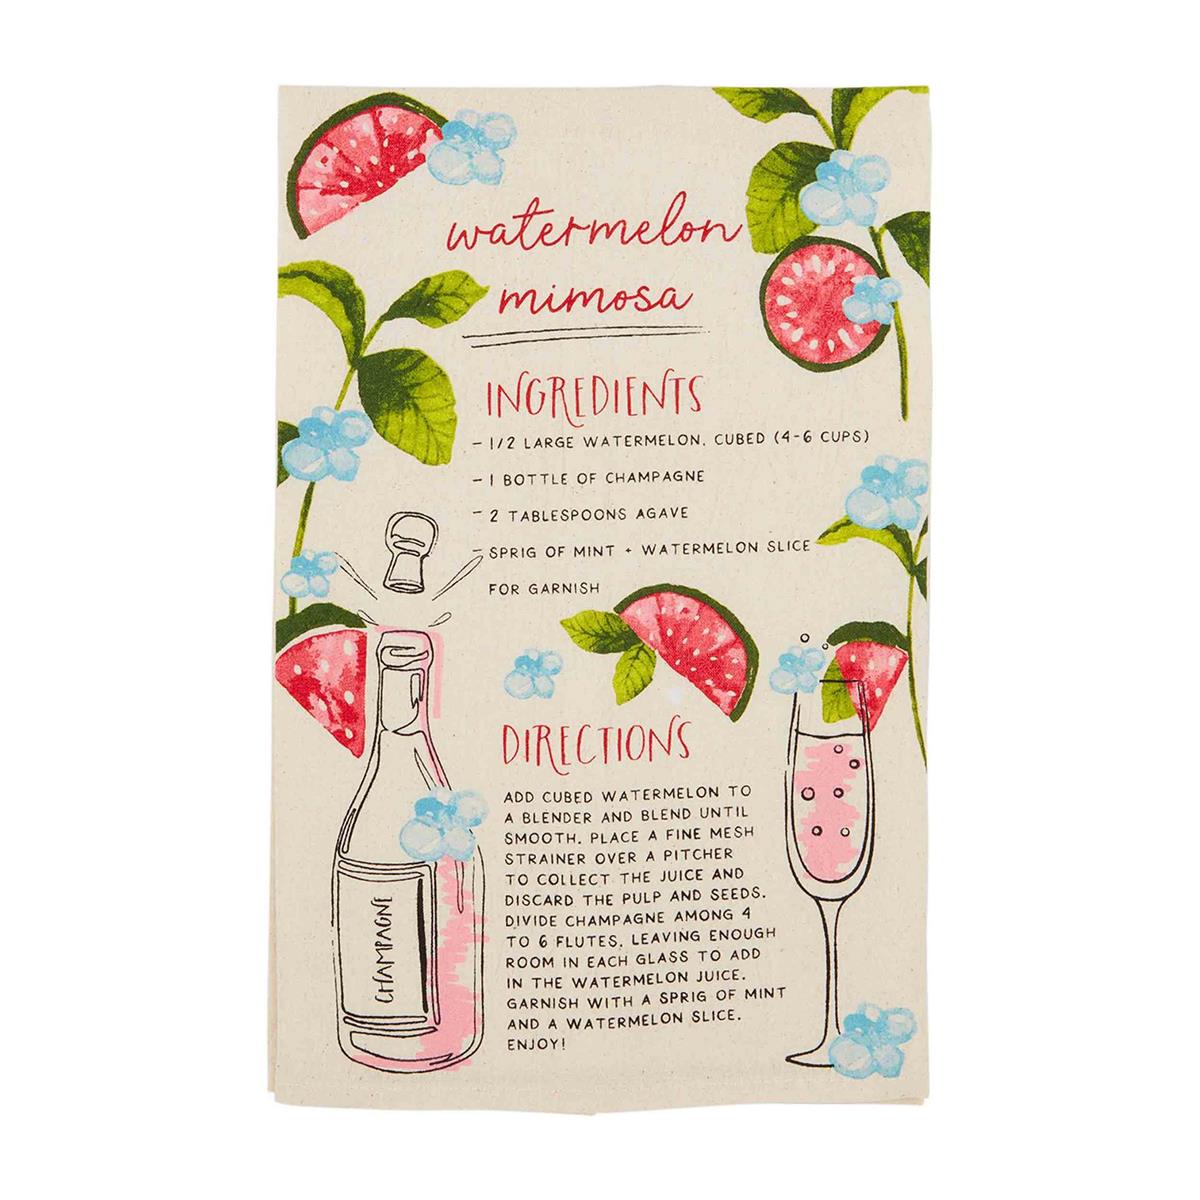 watermelon drink recipe towel with drawings of blue flowers, watermelon slices, champagne bottle, wine glass, and recipe on a white background